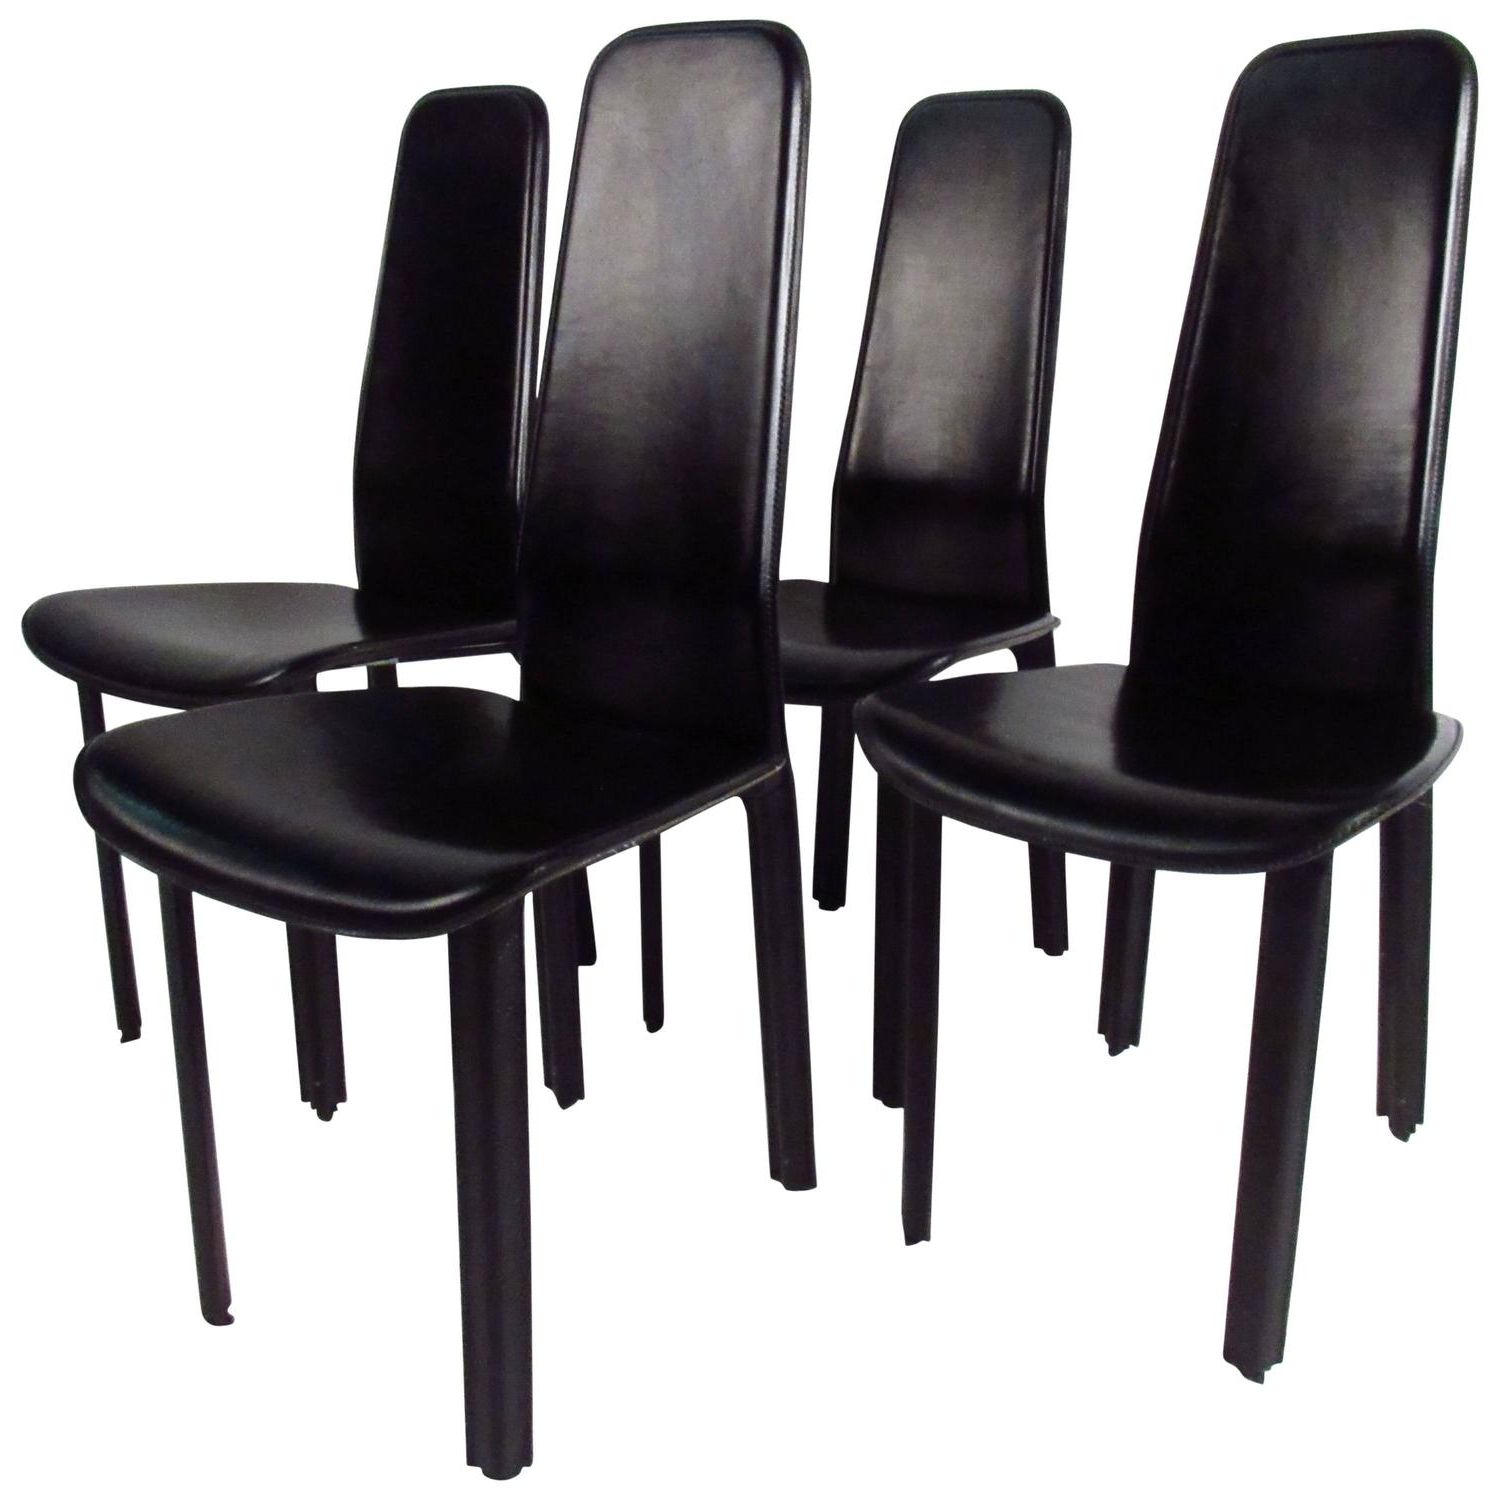 Set Of Italian Leather High Back Dining Chairscidue For Sale At With Regard To Popular High Back Leather Dining Chairs (View 2 of 25)